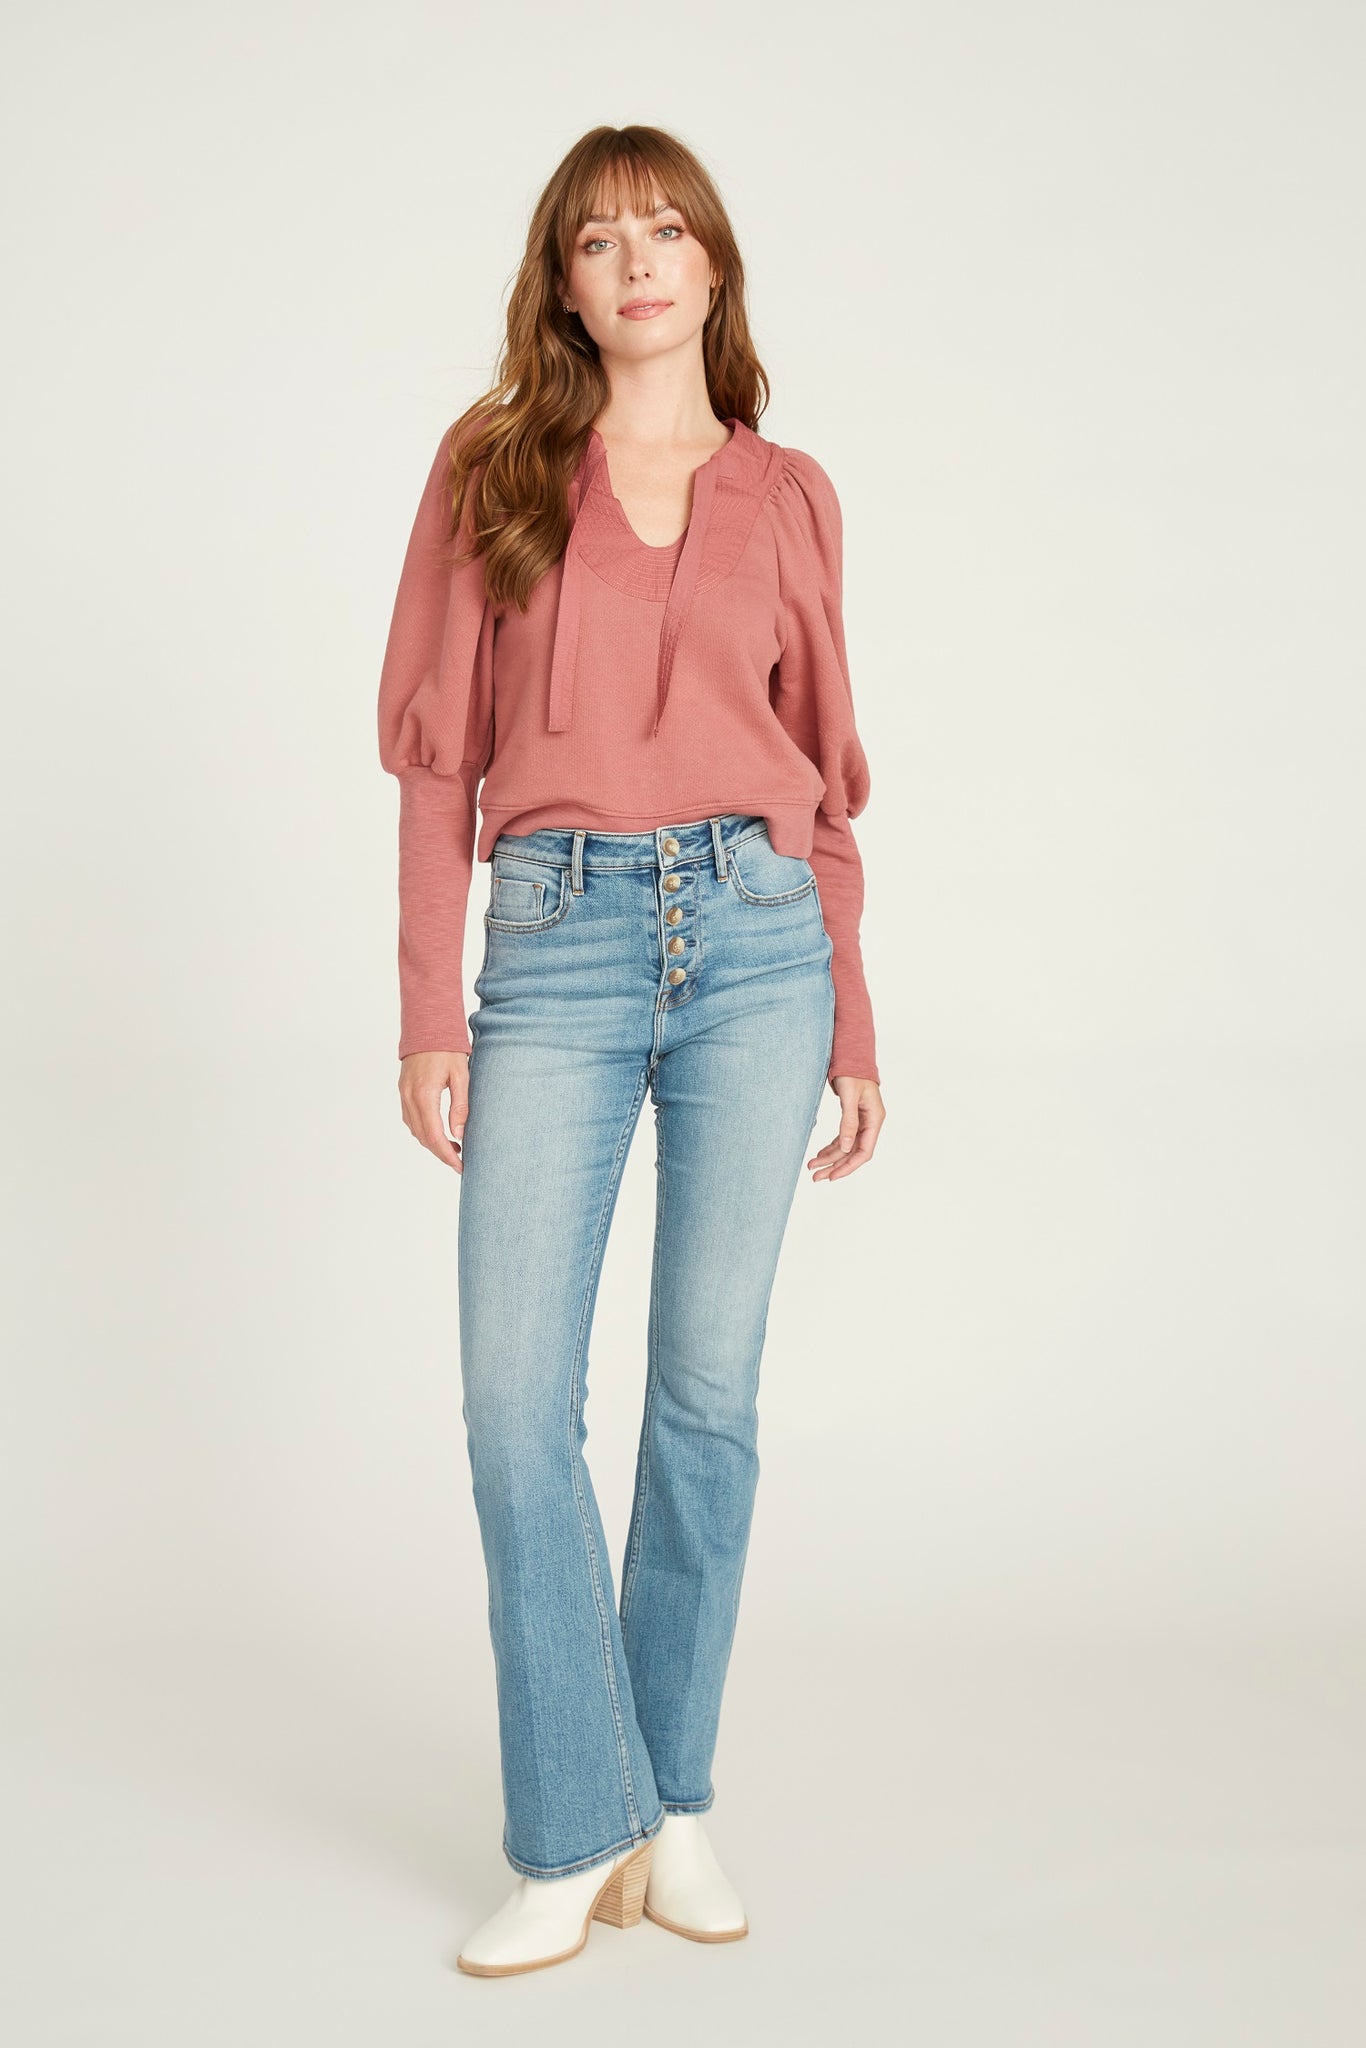 Lena Boot Cut with Button Fly in Light Wash  - SALE